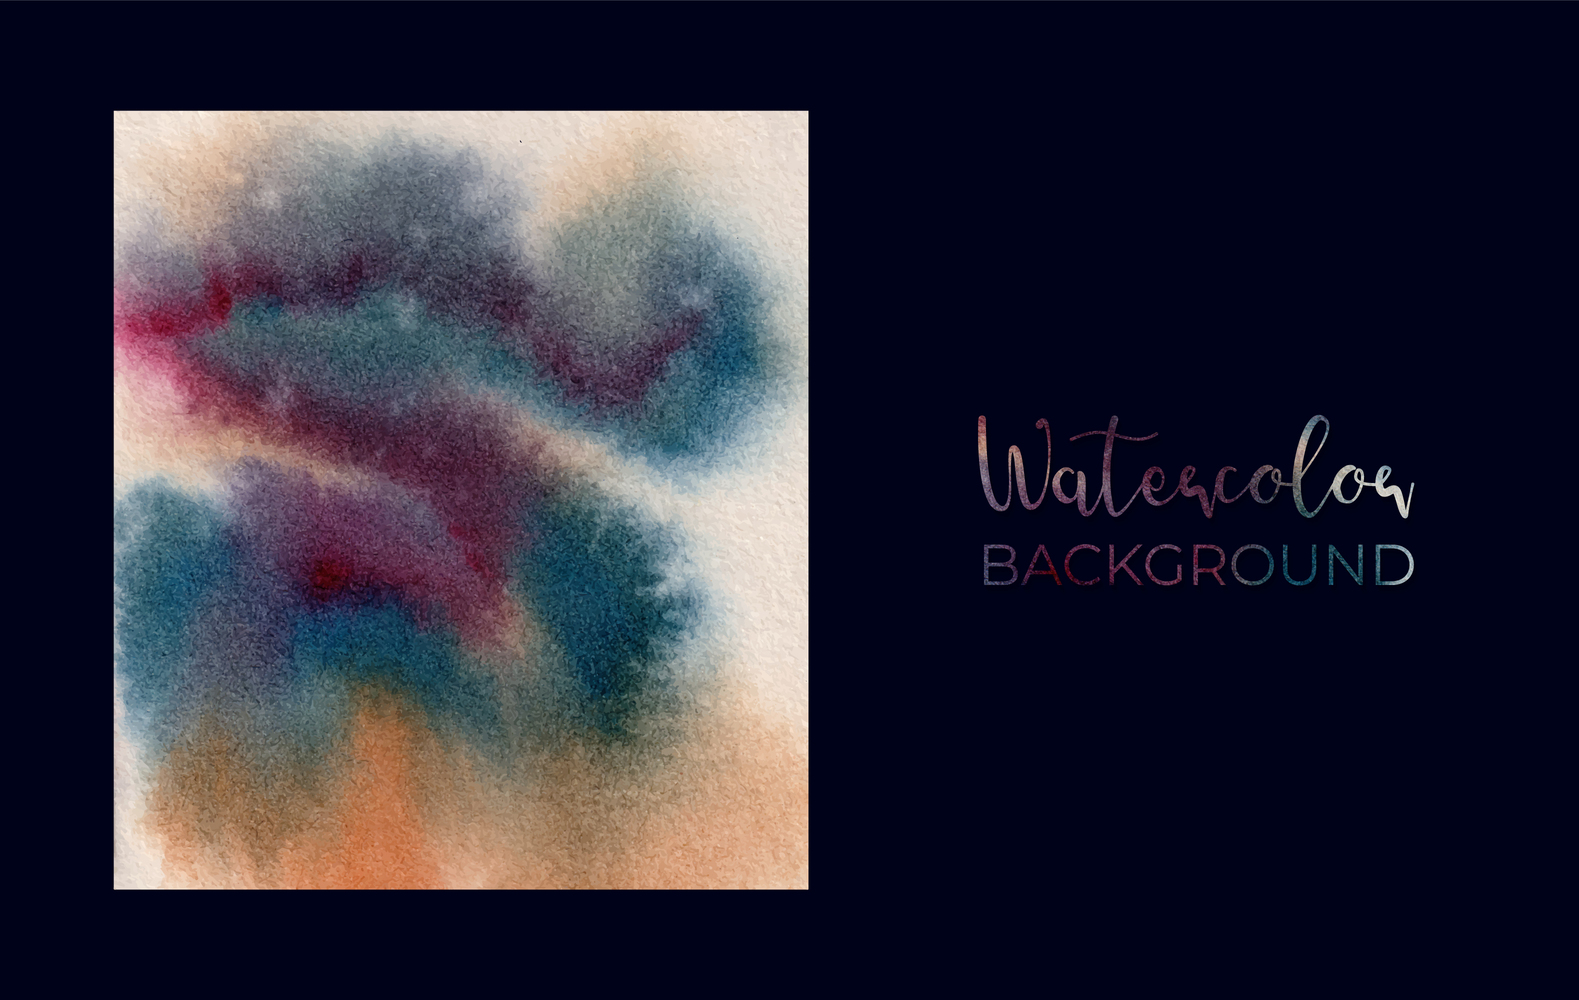 Abstract Watercolor Hand Paint Bundles Background, vector illustration